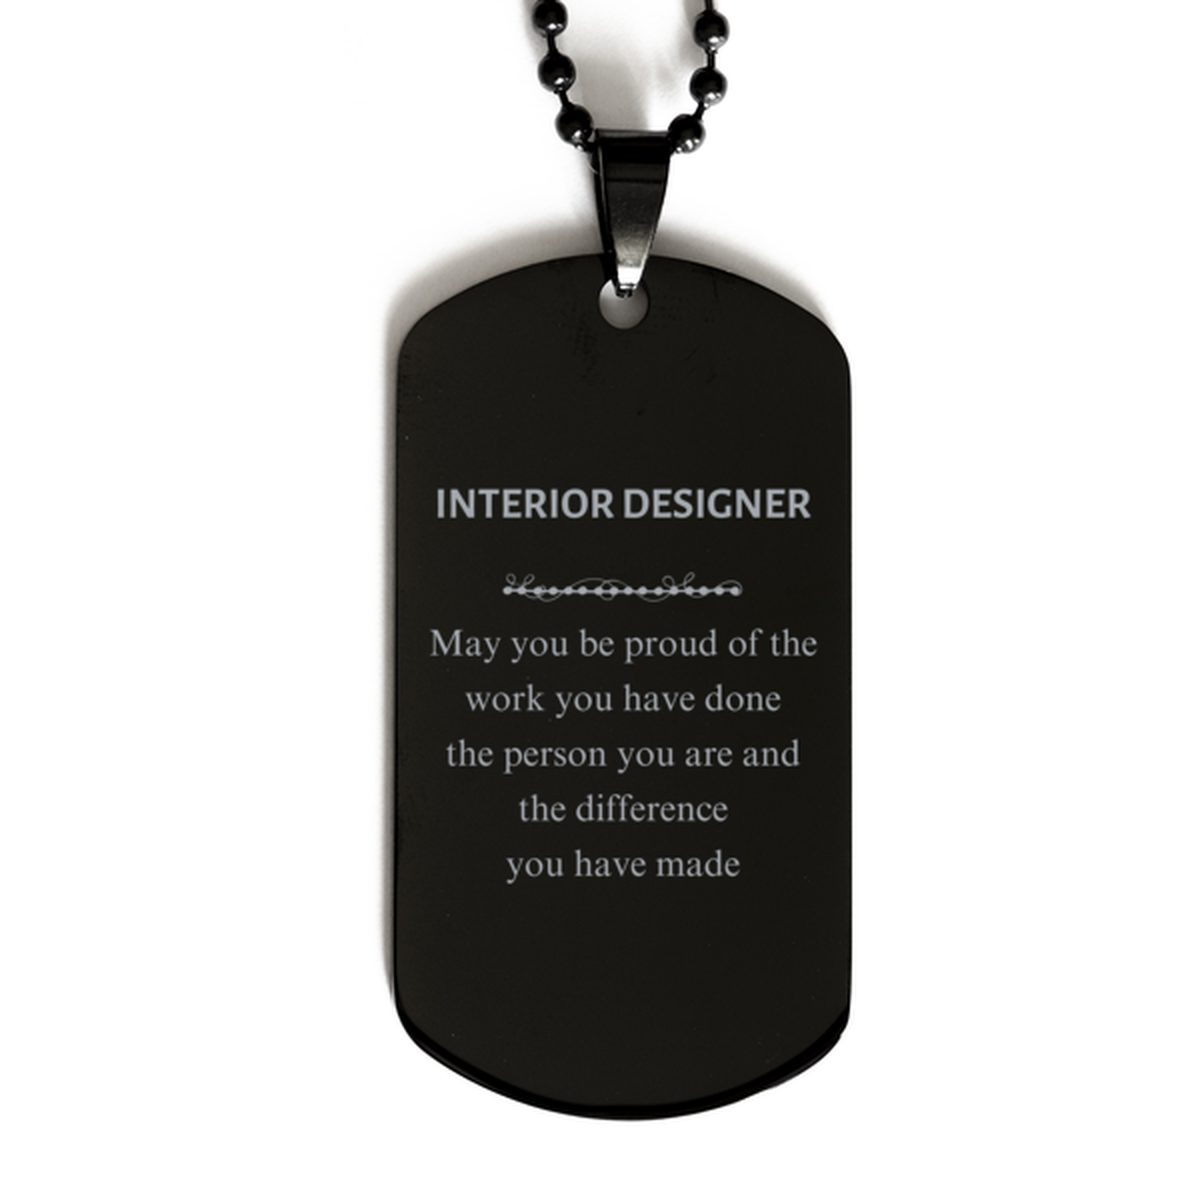 Interior Designer May you be proud of the work you have done, Retirement Interior Designer Black Dog Tag for Colleague Appreciation Gifts Amazing for Interior Designer